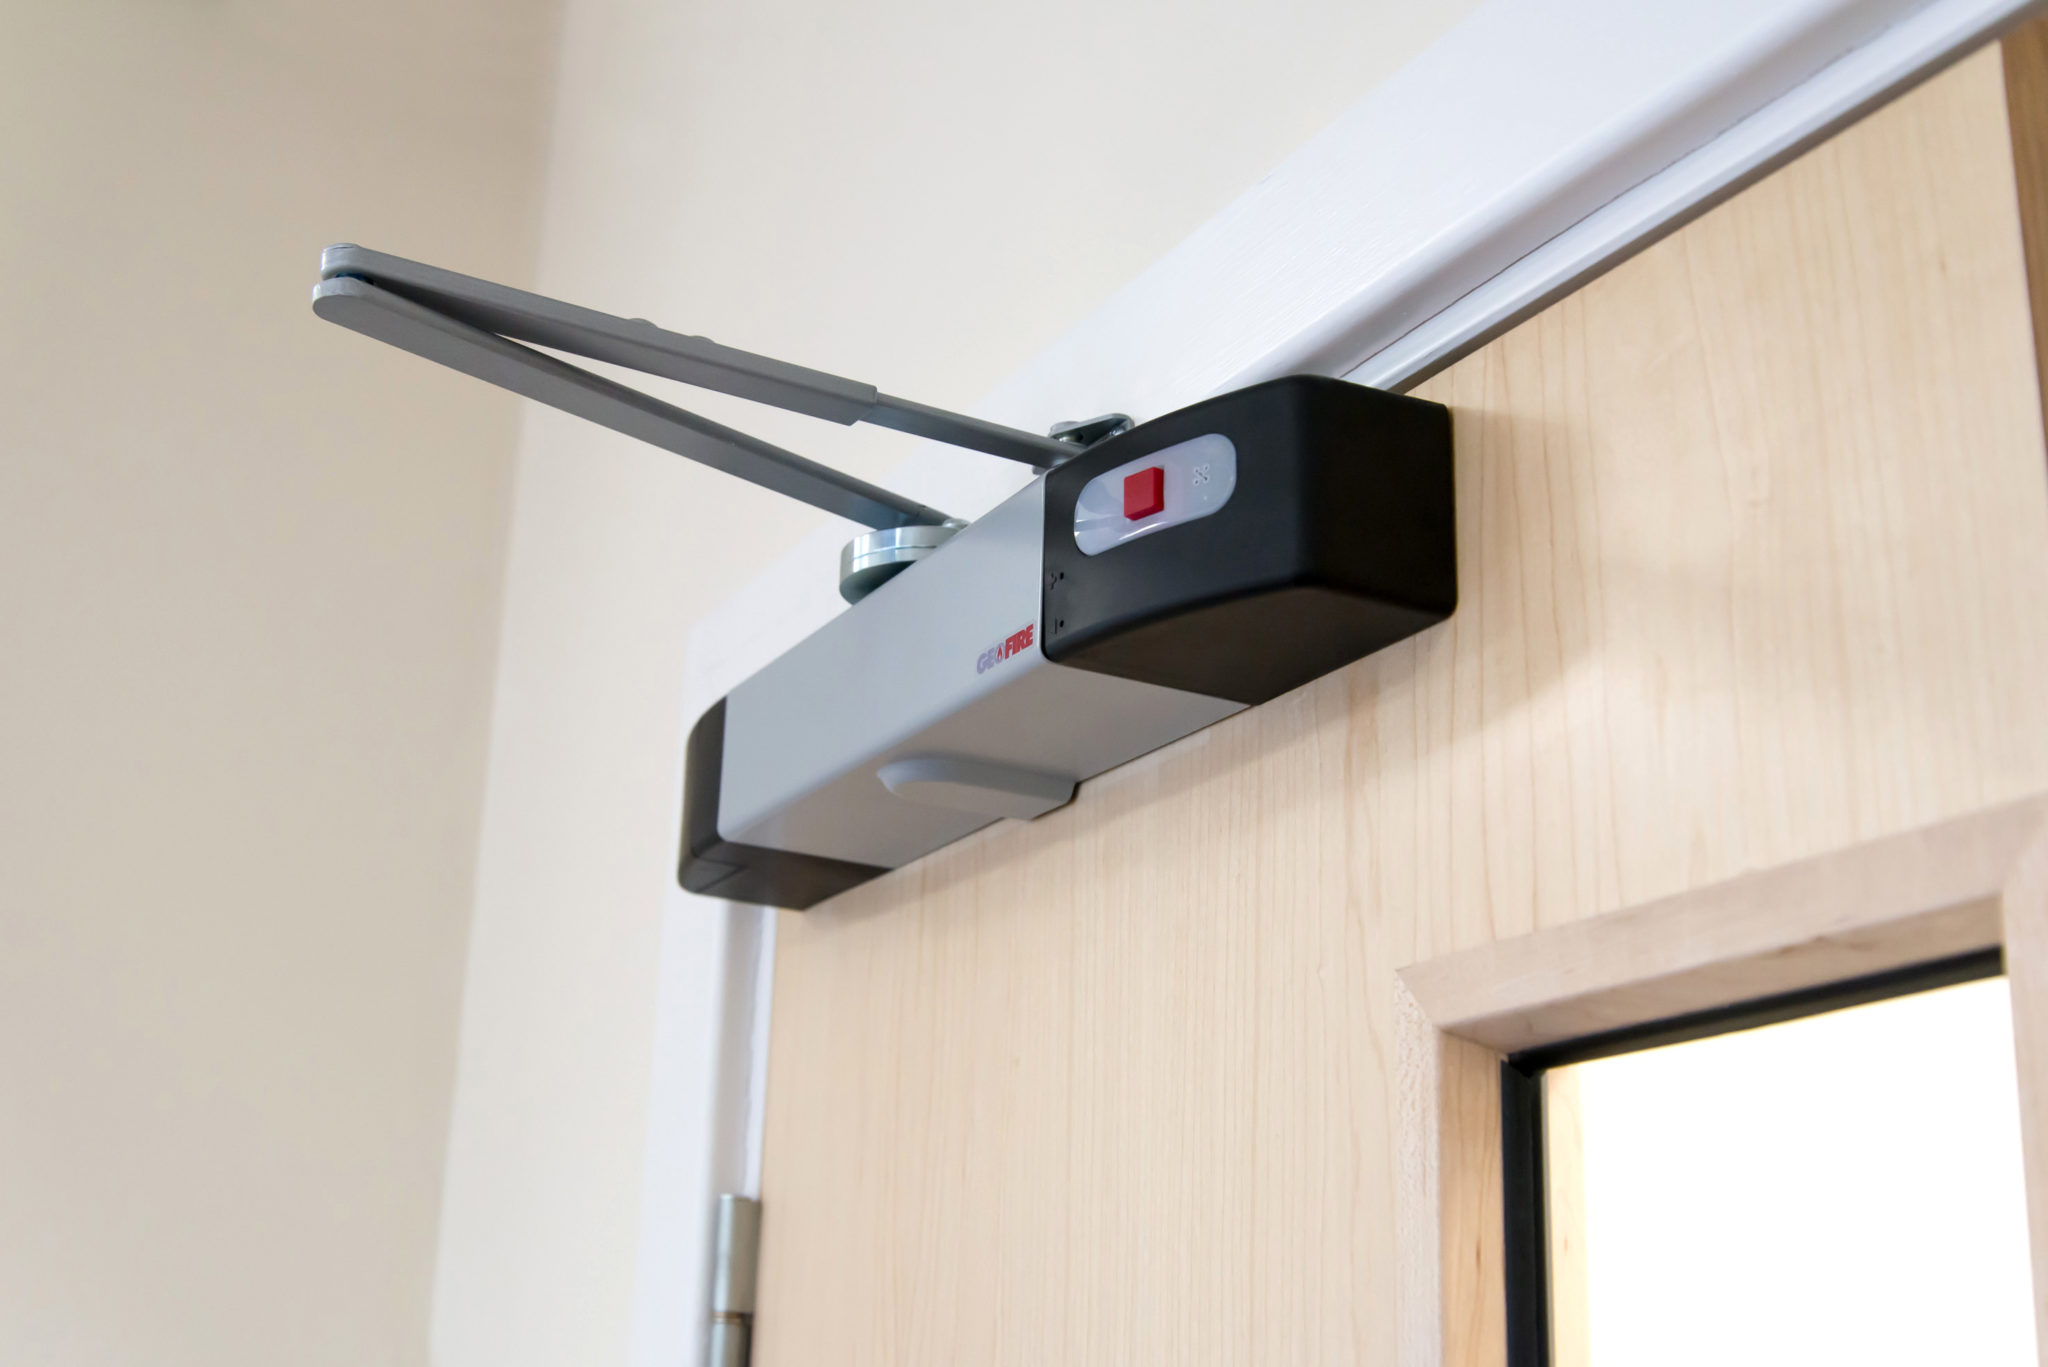 Agrippa fire door closers ease way at care home